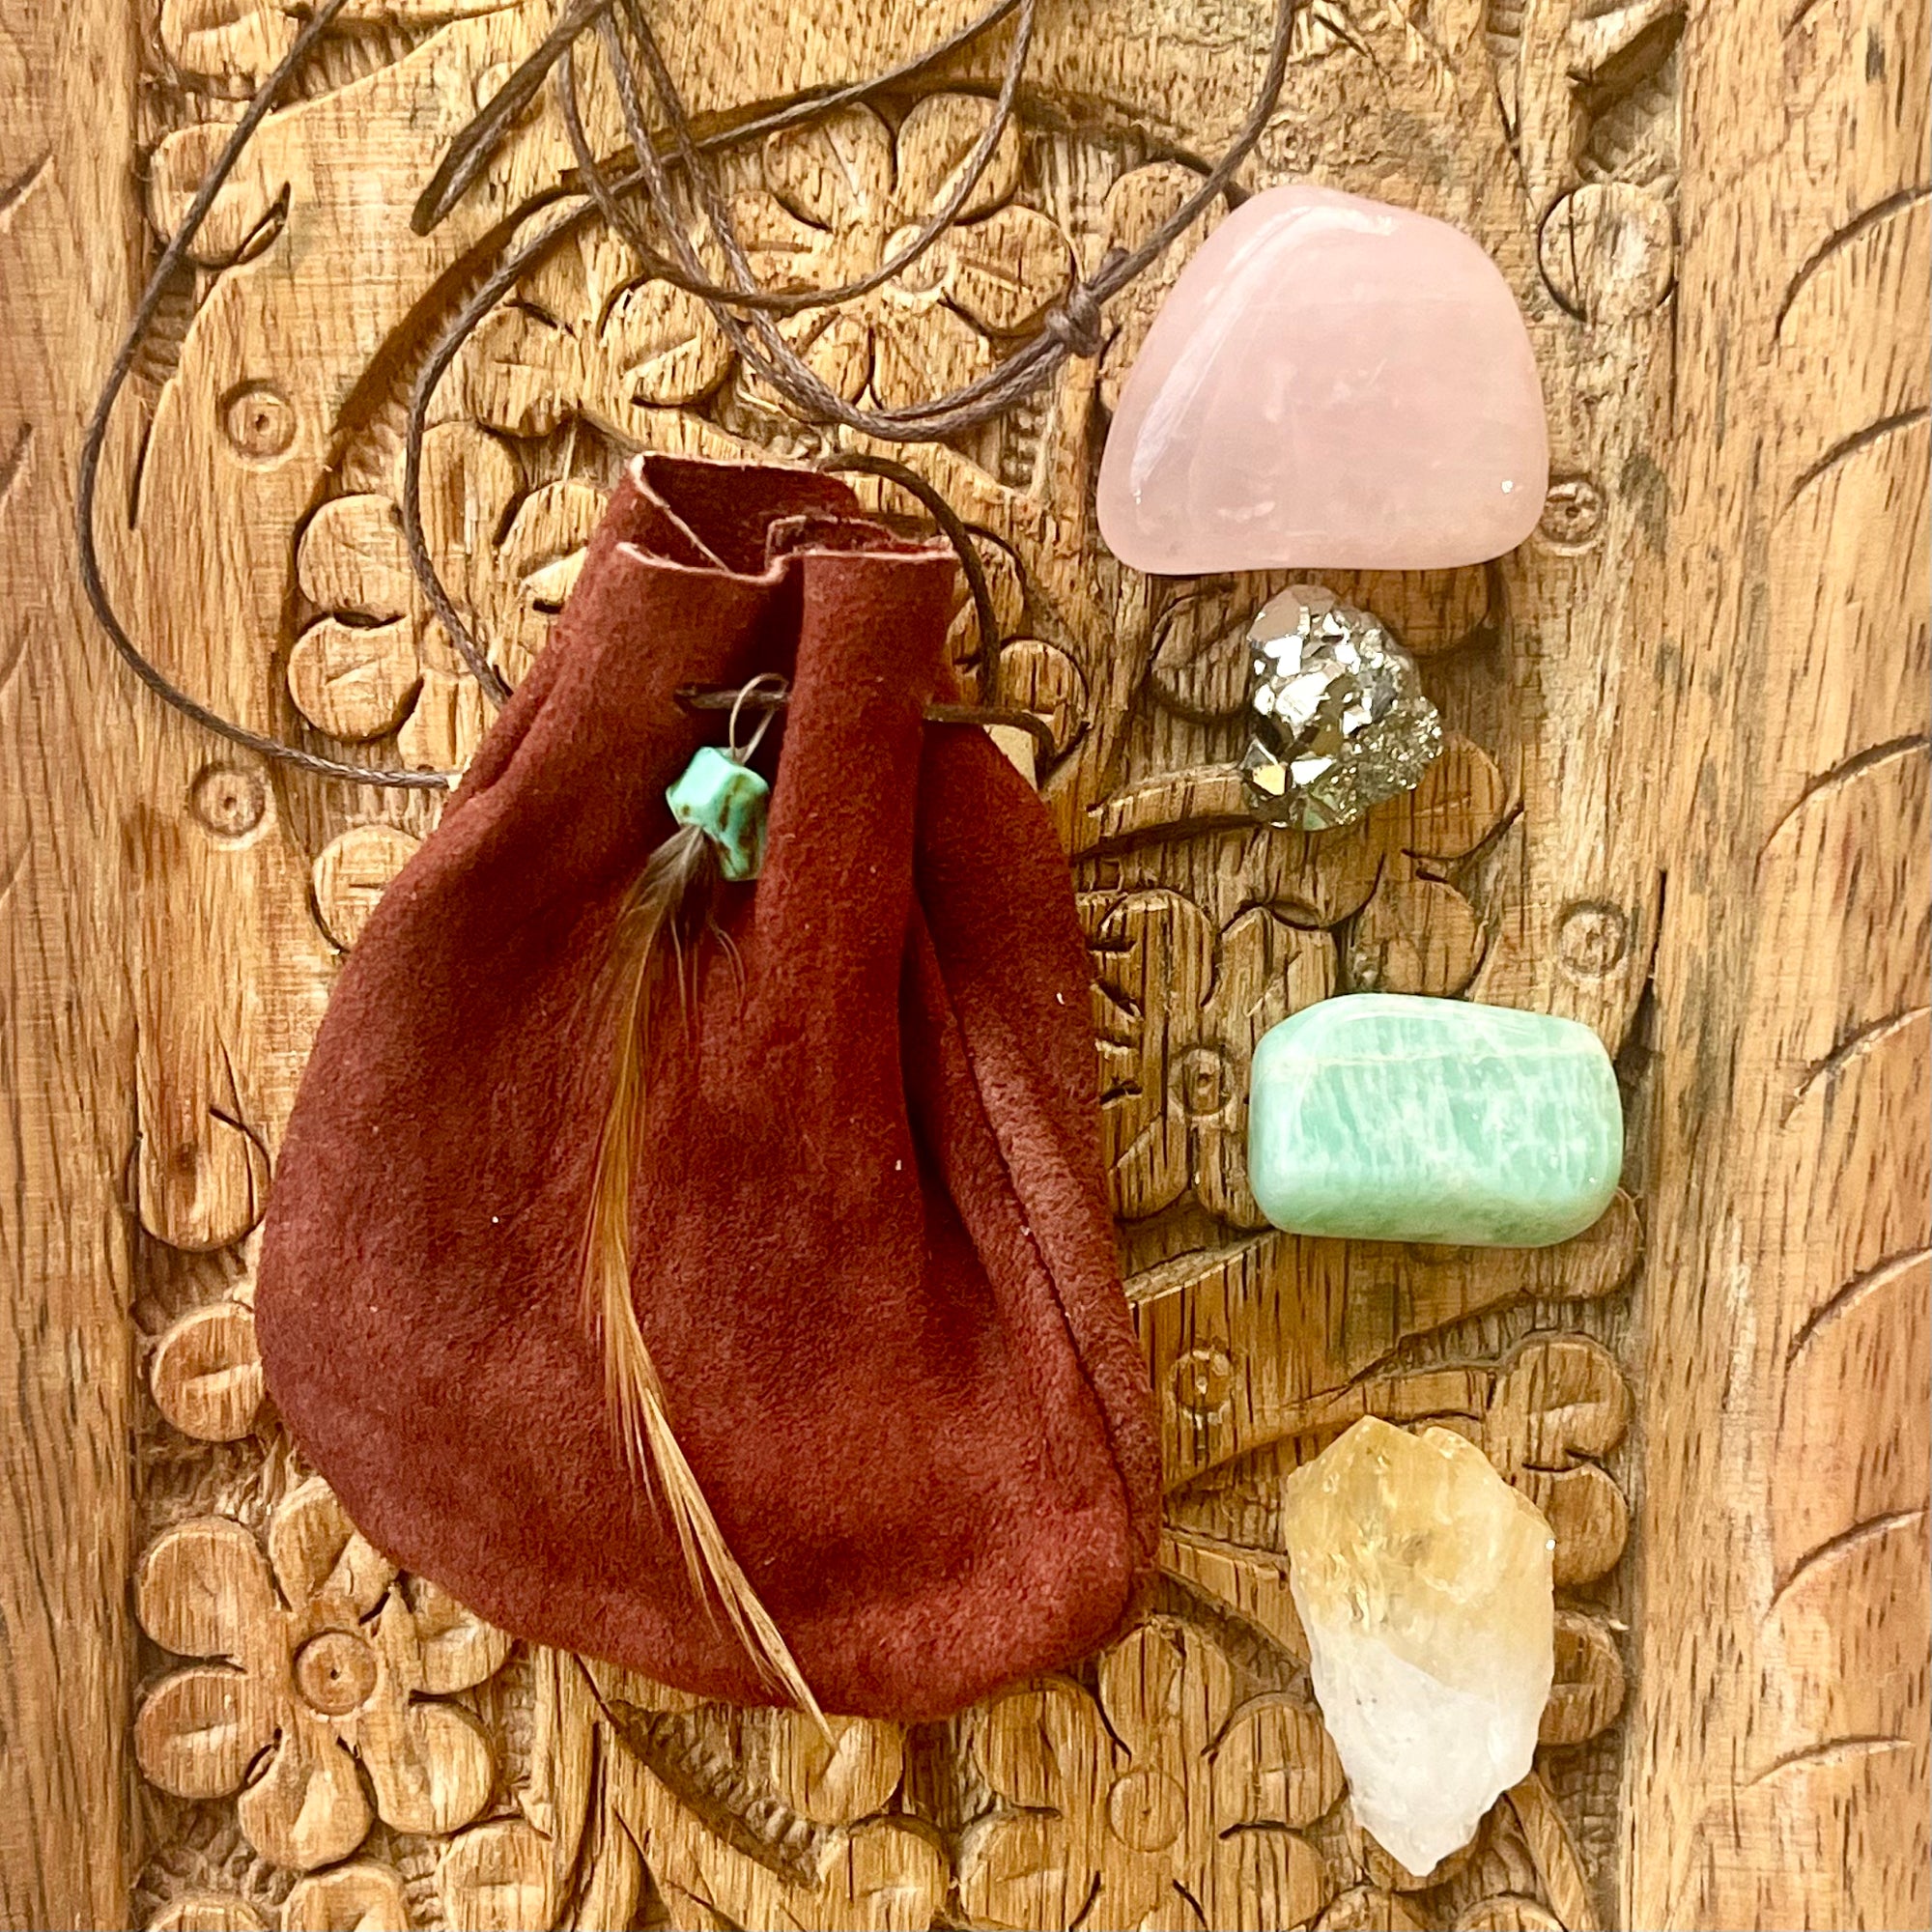 Native American Medicine Bag with Crystals for Healing